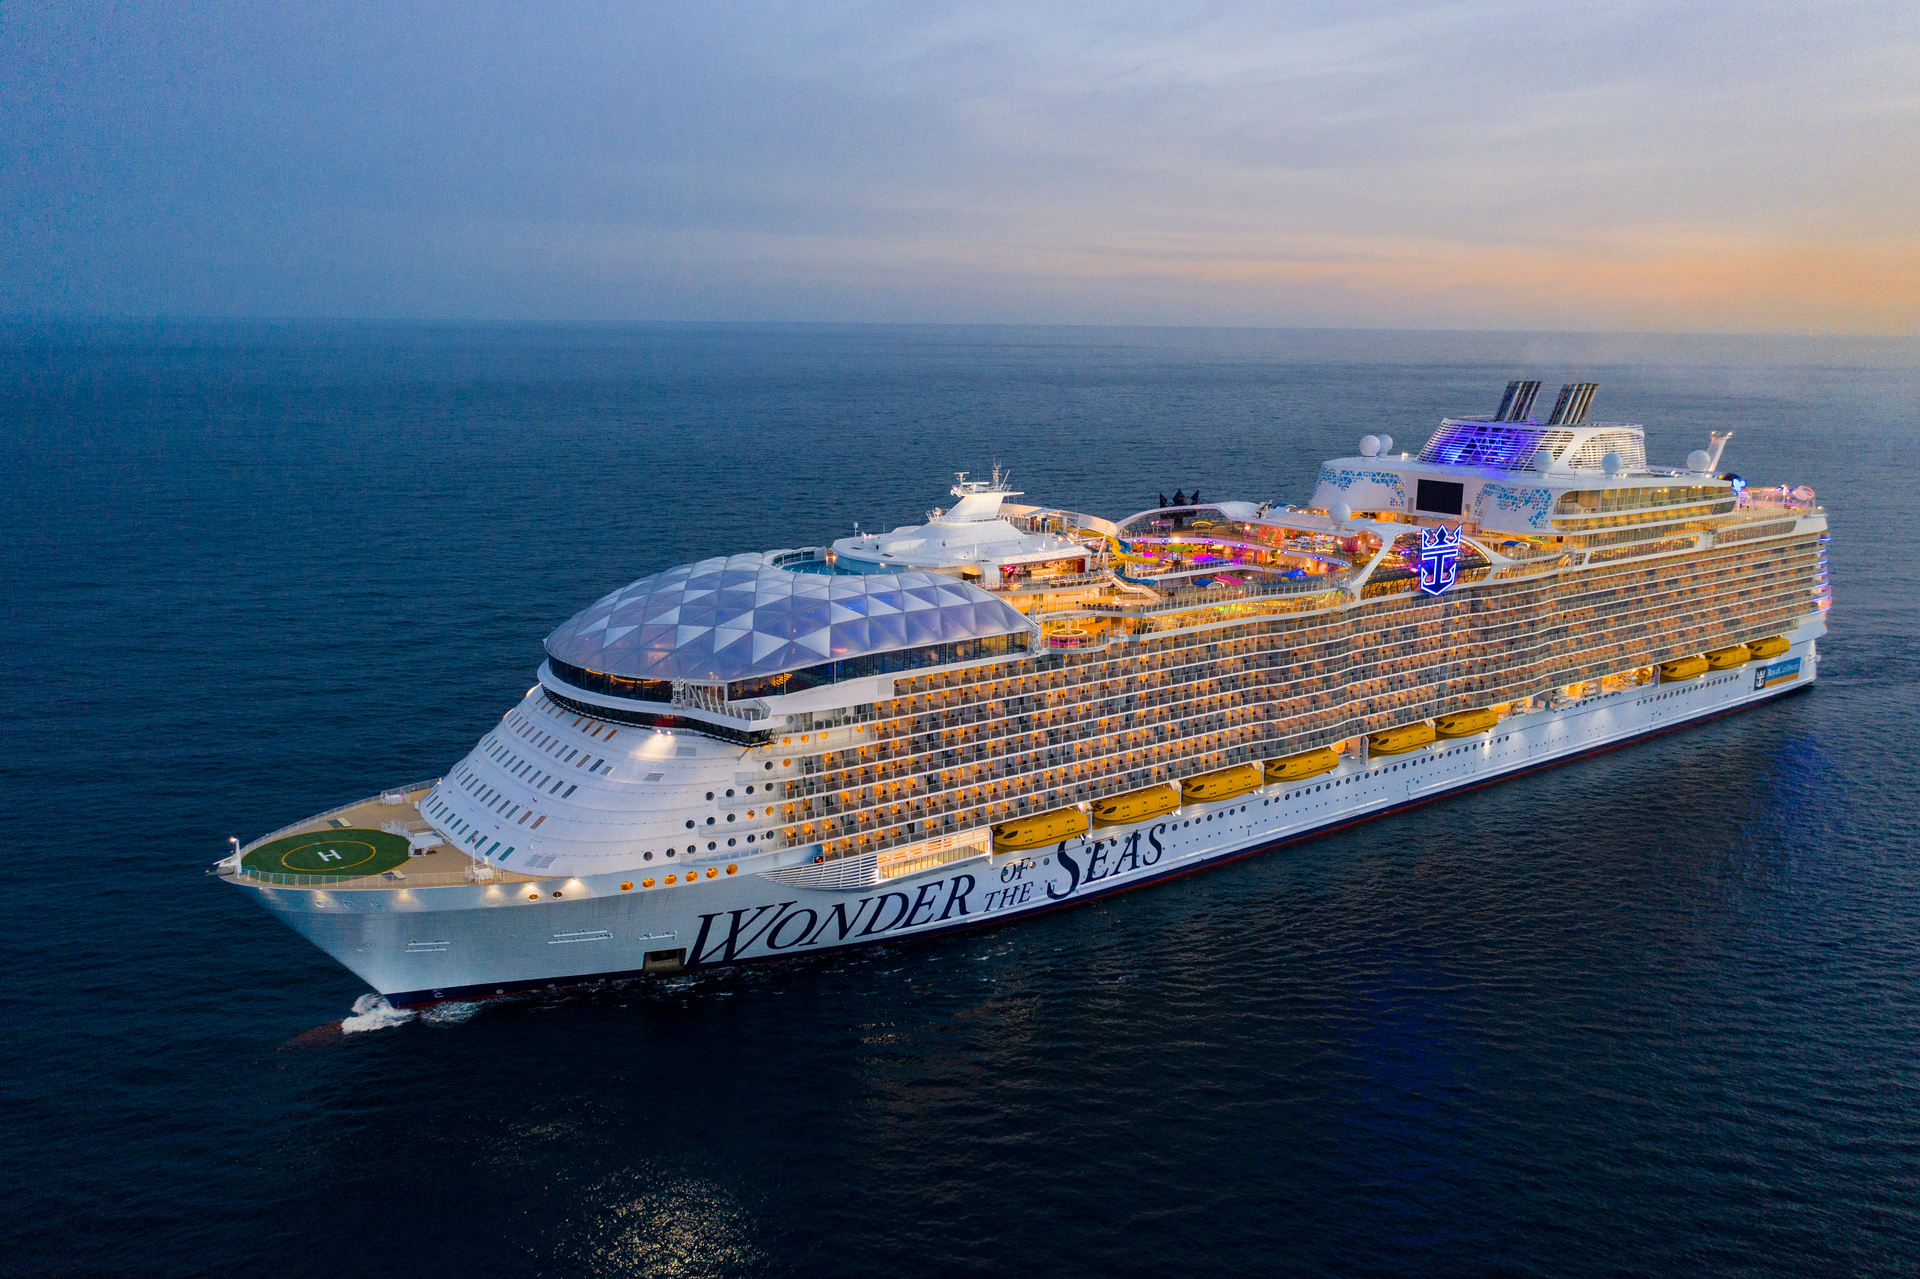 World's largest cruise ship, Wonder of the Seas, sets sail to Caribbean -  NZ Herald